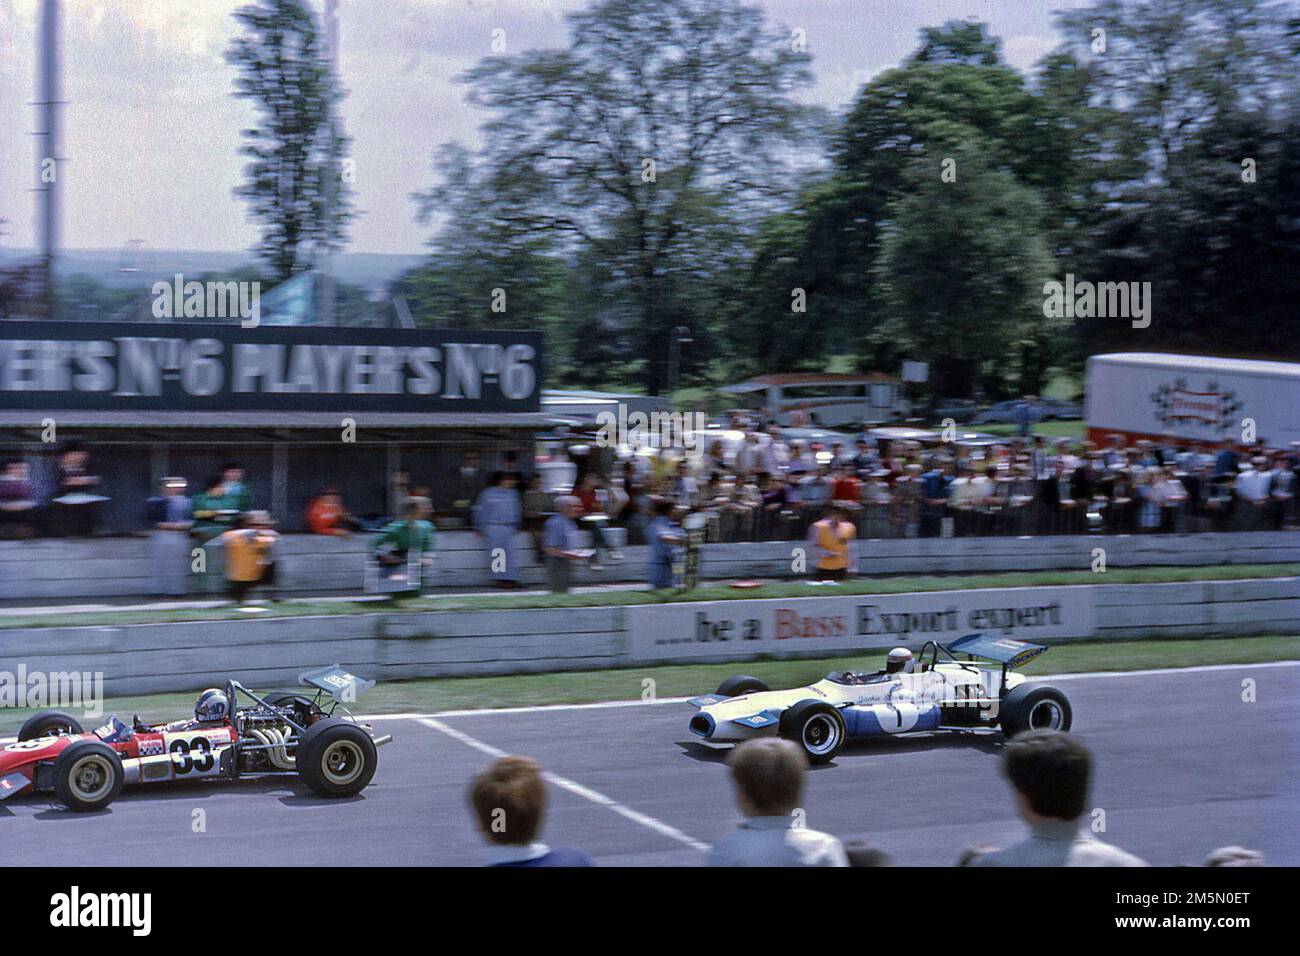 Francois Cevert in a Tecno ahead of Jackie Stewart in a Brabham BT30 at the 1970 European Formula 2 race at Crystal Palace race track 25/5/1970 Stock Photo